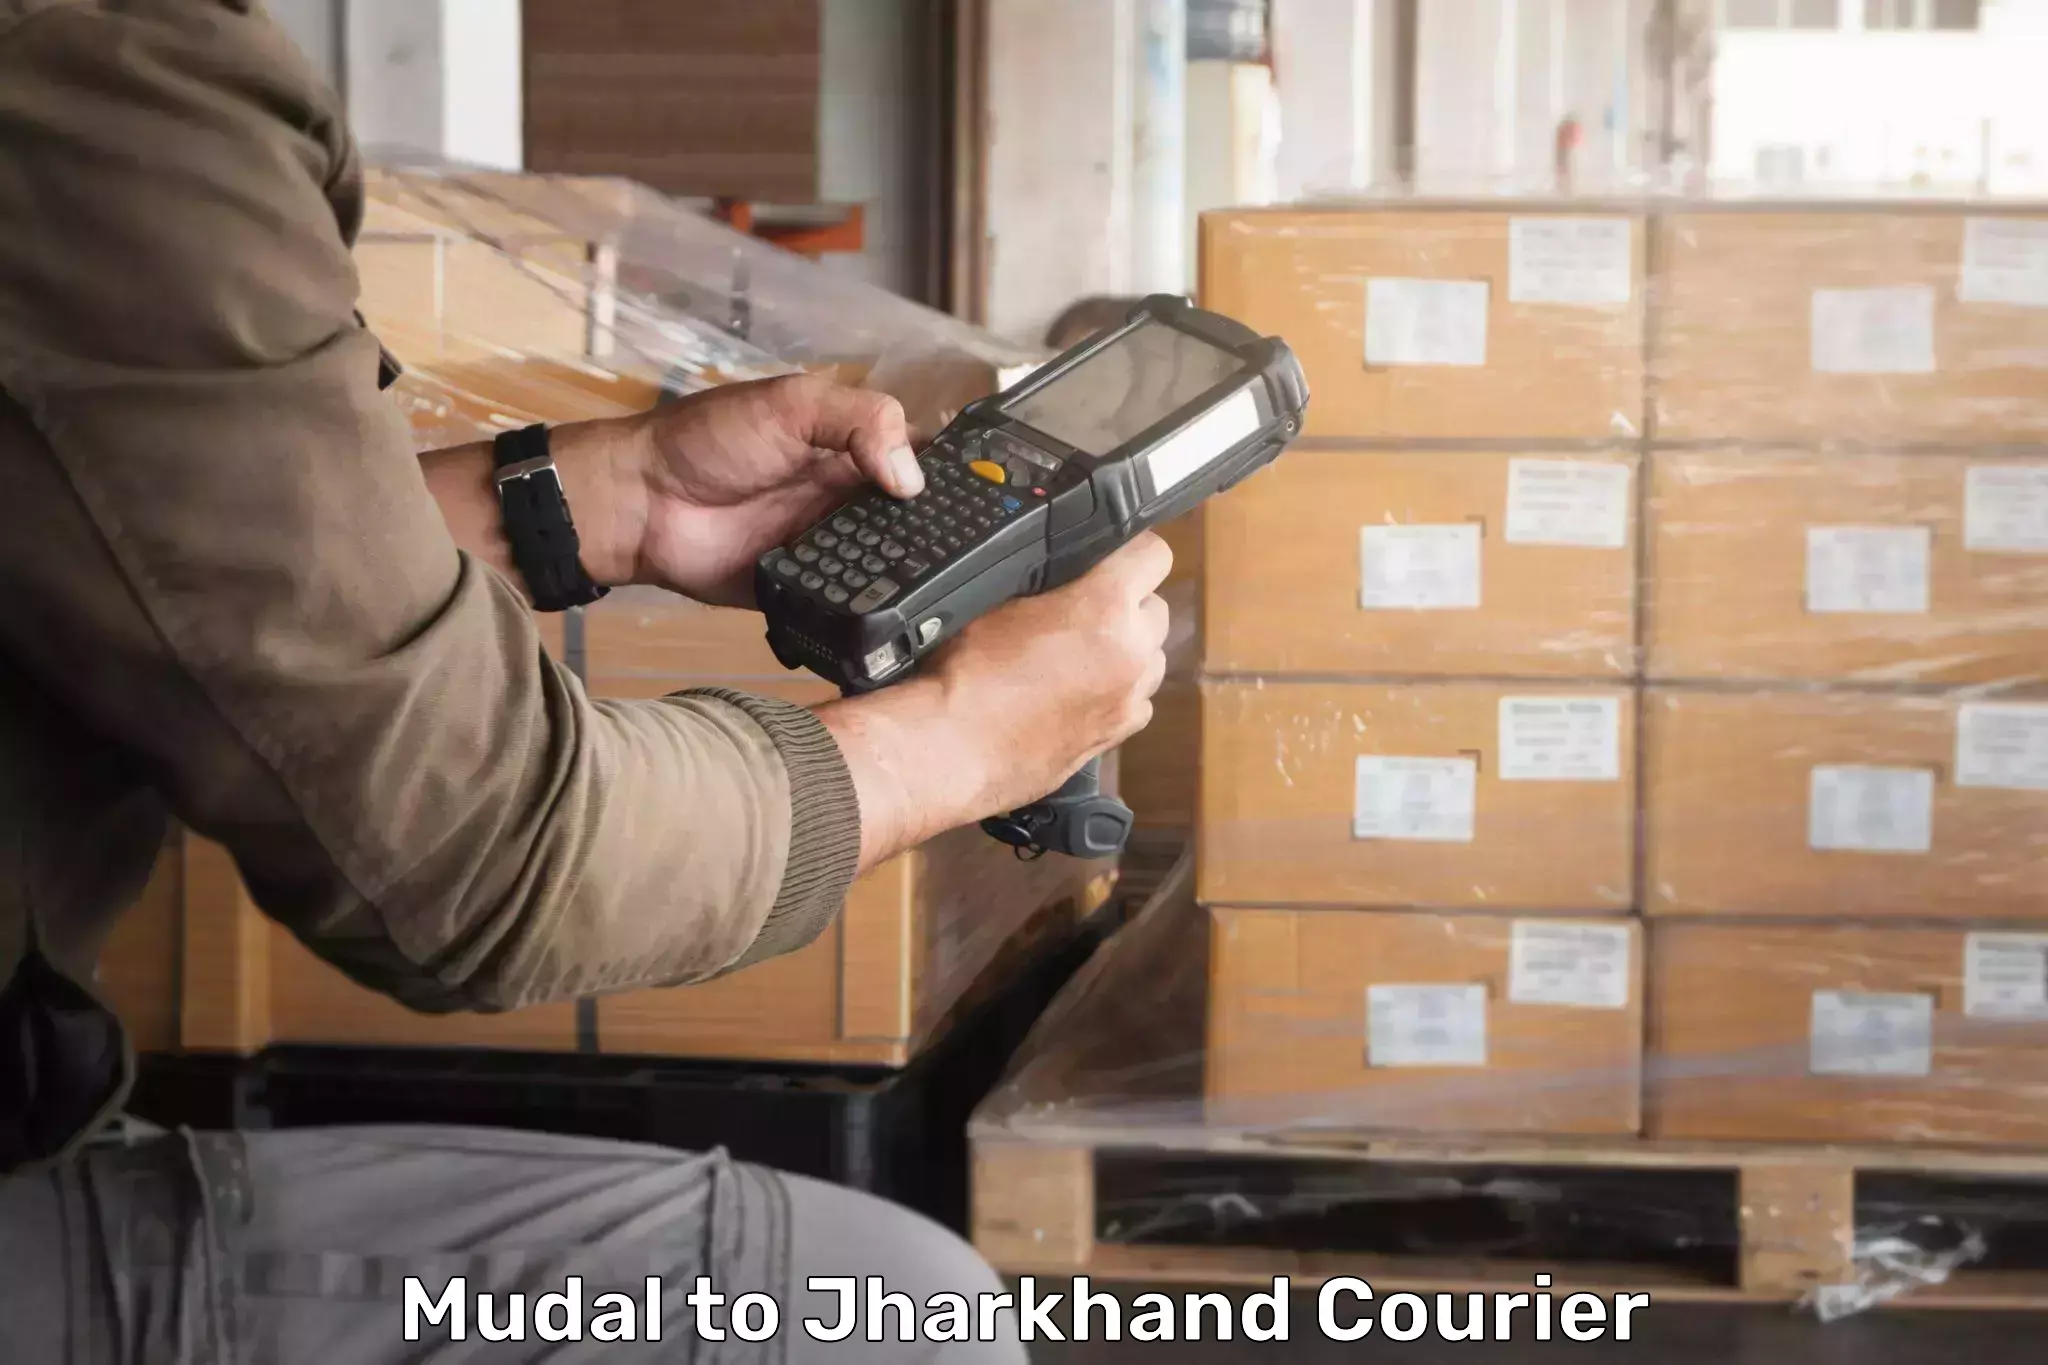 User-friendly delivery service Mudal to Rajmahal